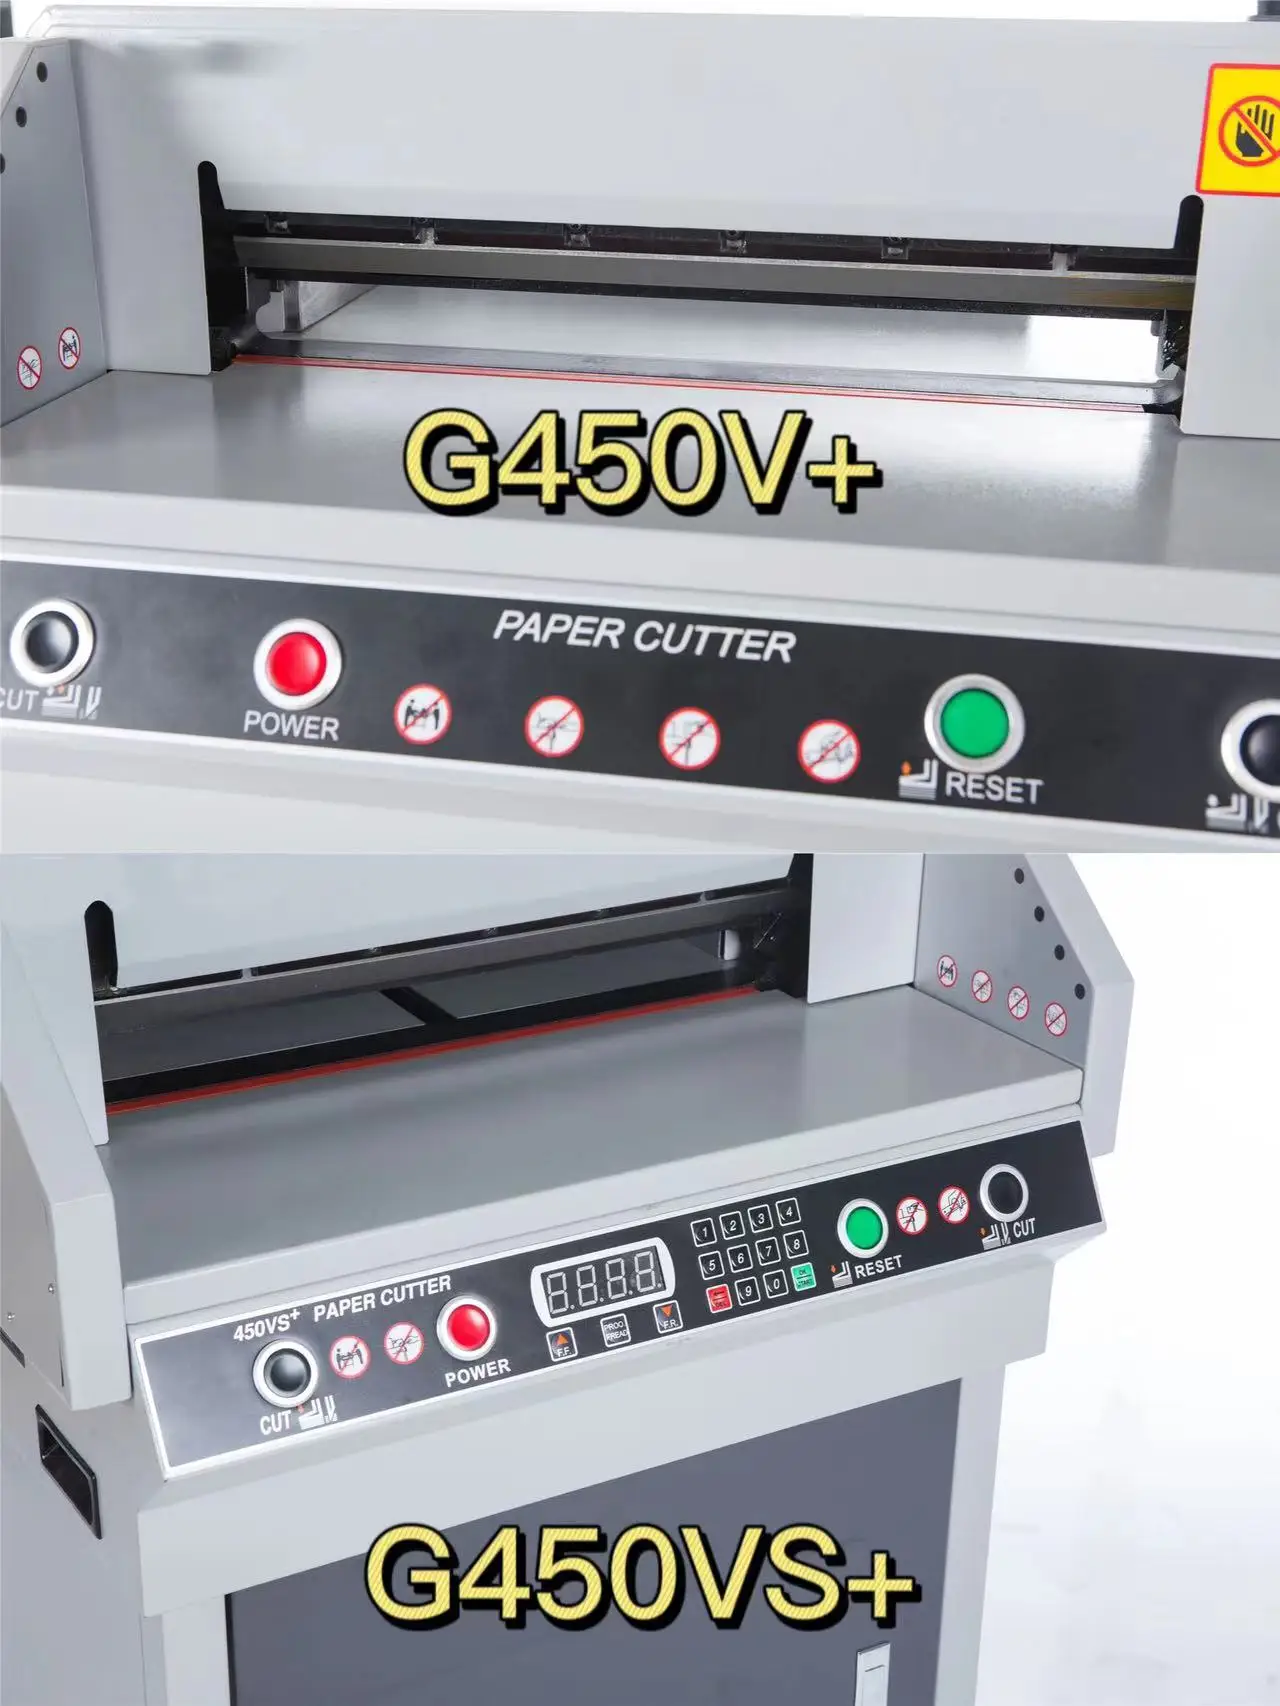 FRONT A3 ELECTRIC PAPER CUTTER G450V+ and G450VS+ 450mm on hot sale